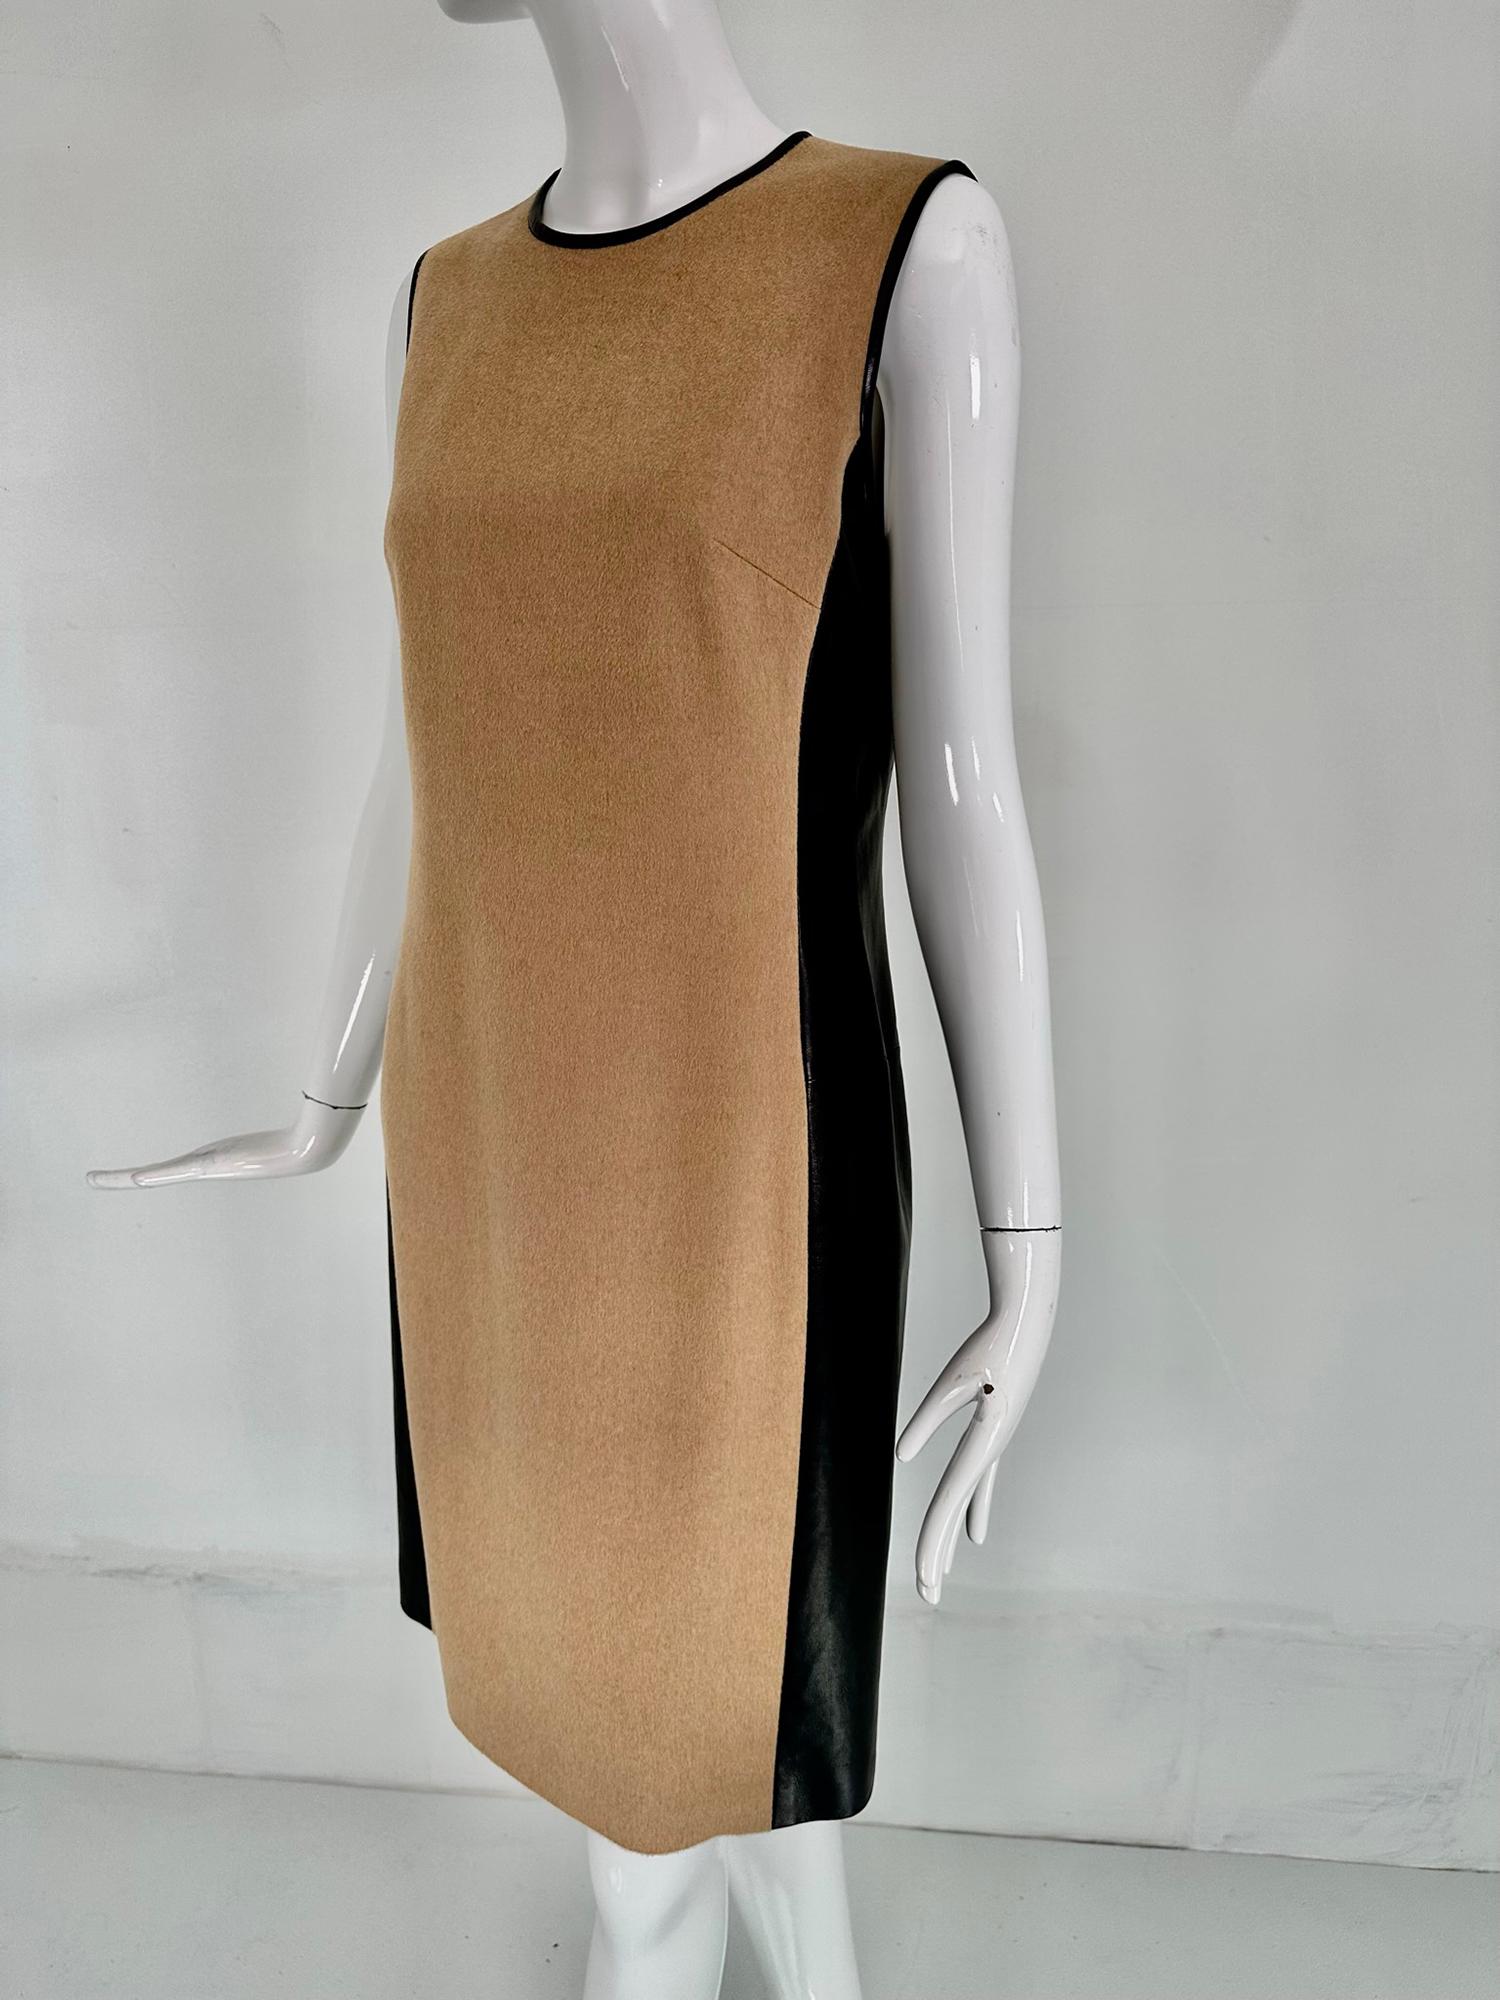 Ralph Lauren Black Label, baby camel hair with black lamb leather sheath dress, unworn with tags, marked size 8. A classic dress in the most amazing fabric and softest leather.  Jewel neck, sleeveless sheath with black lamb leather neck & arm